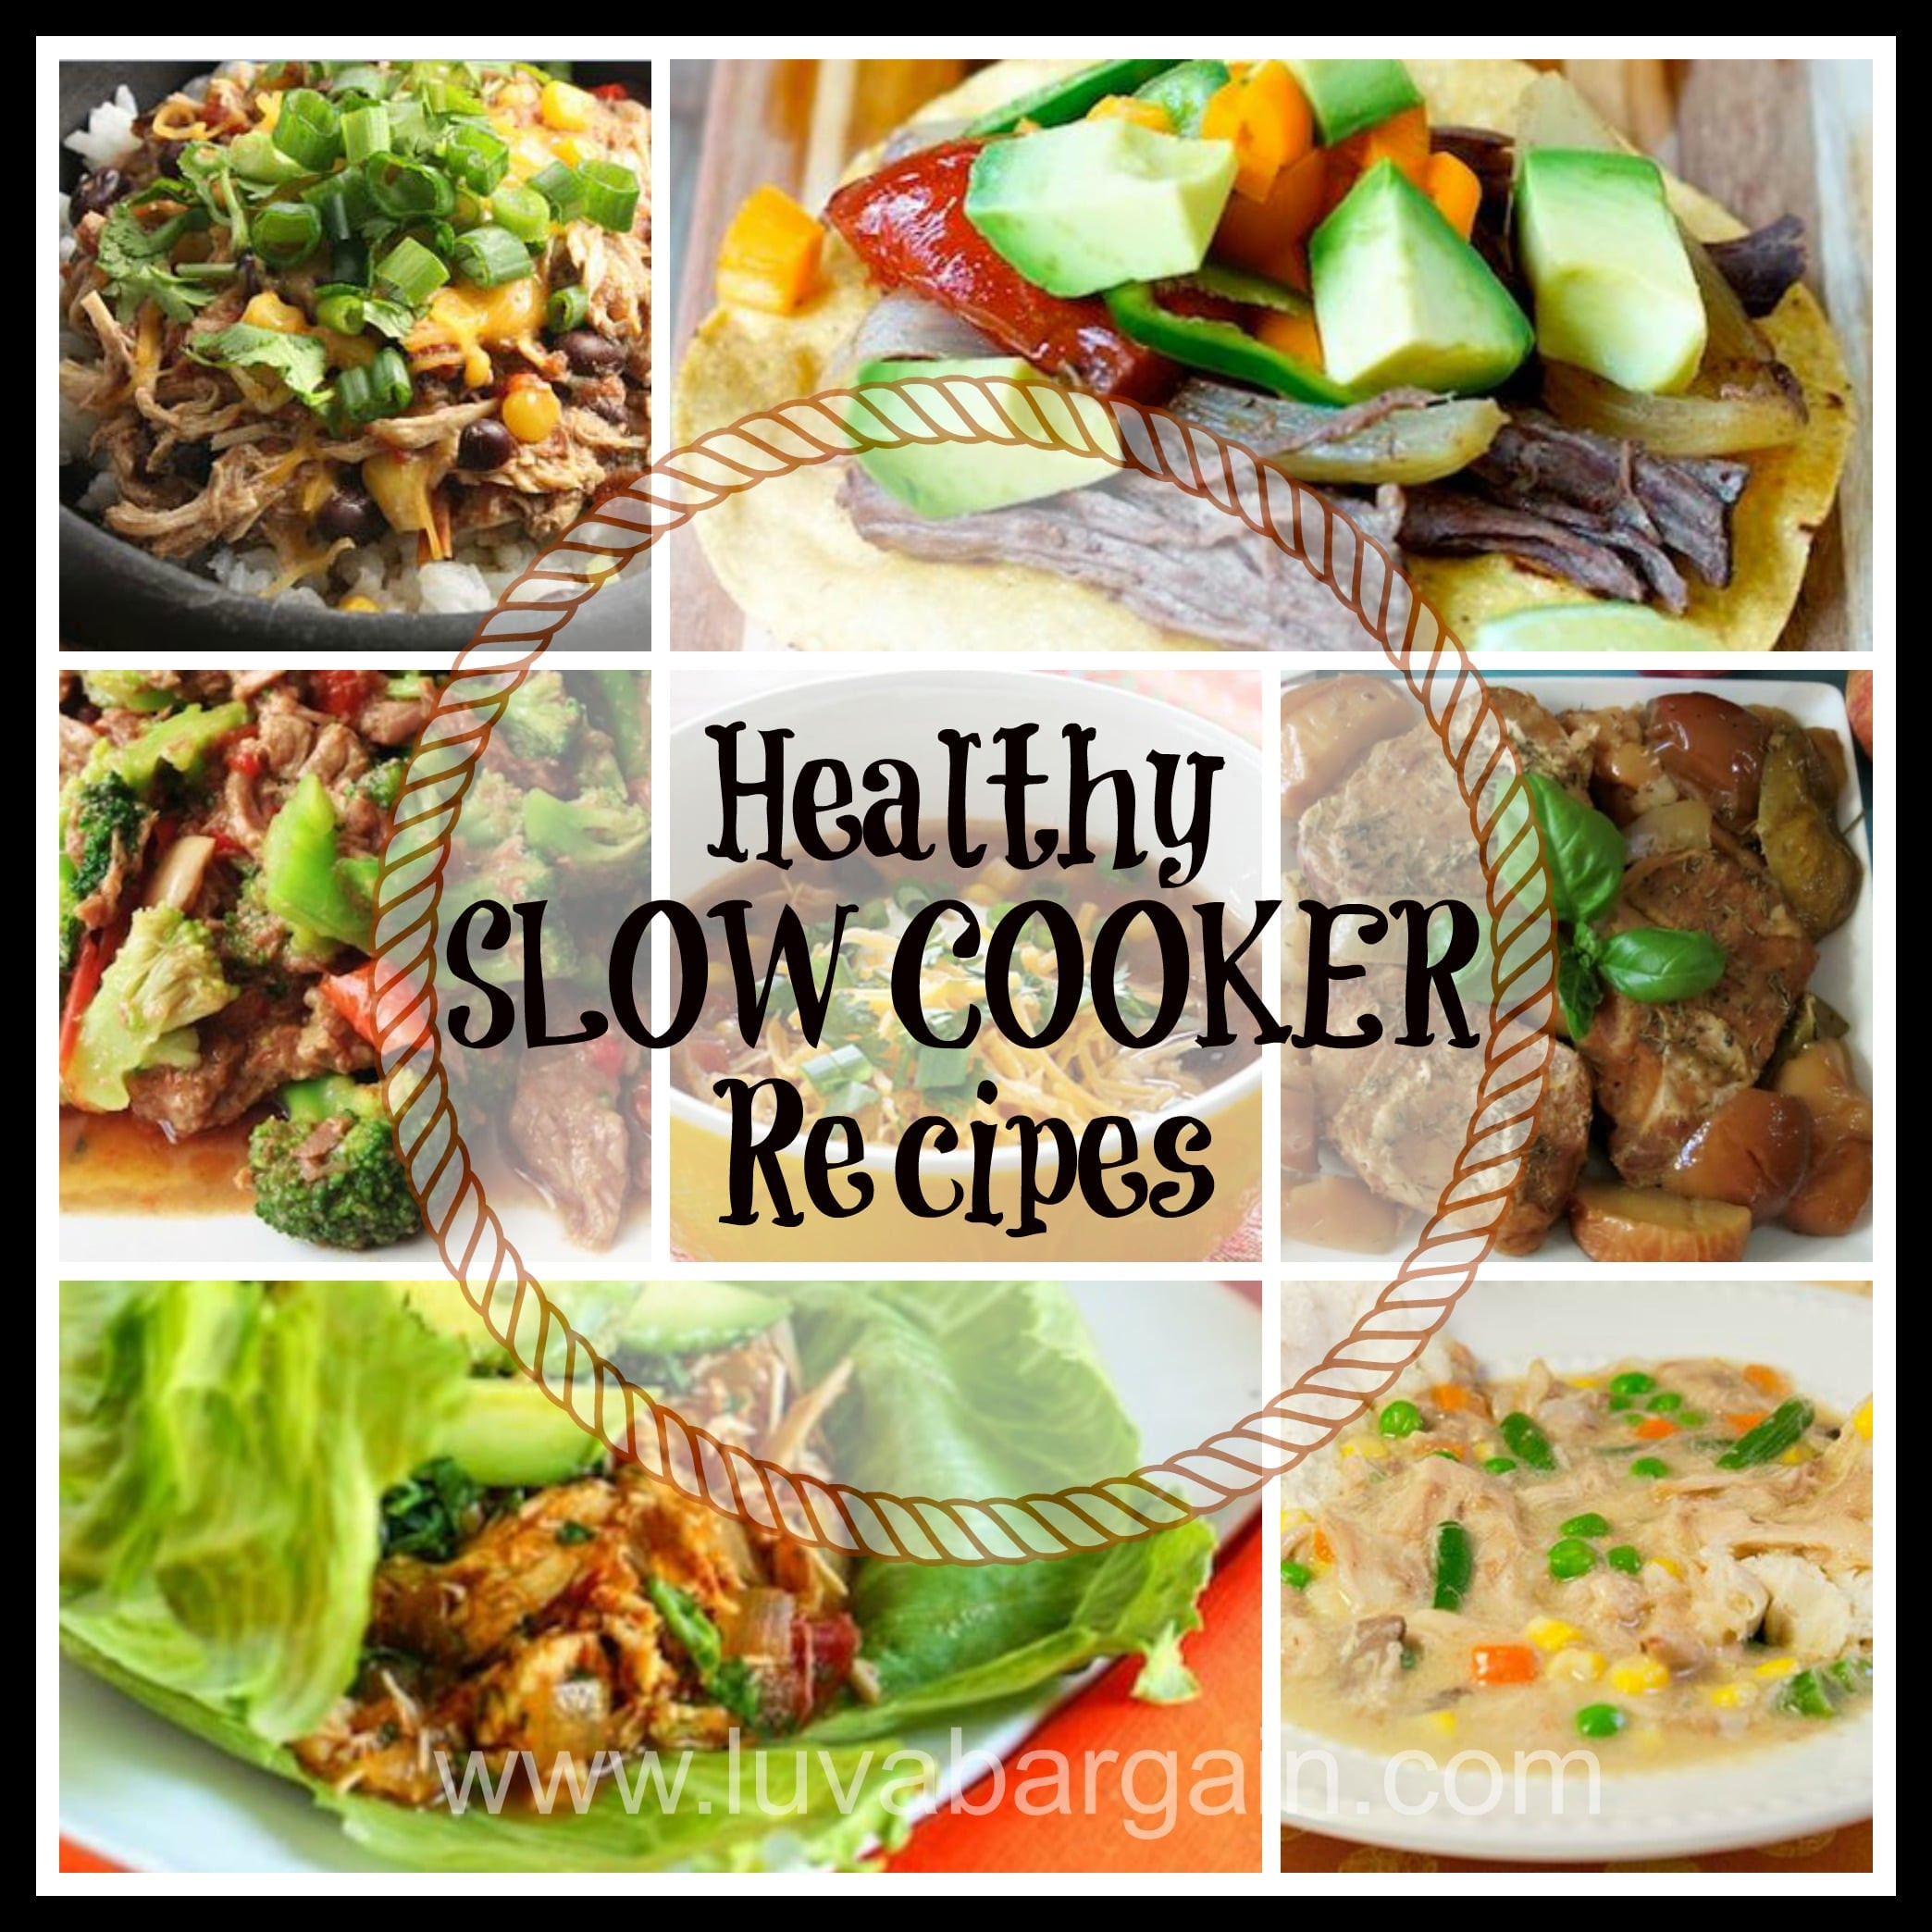 Best Healthy Slow Cooker Recipes
 Healthy Slow Cooker Recipes